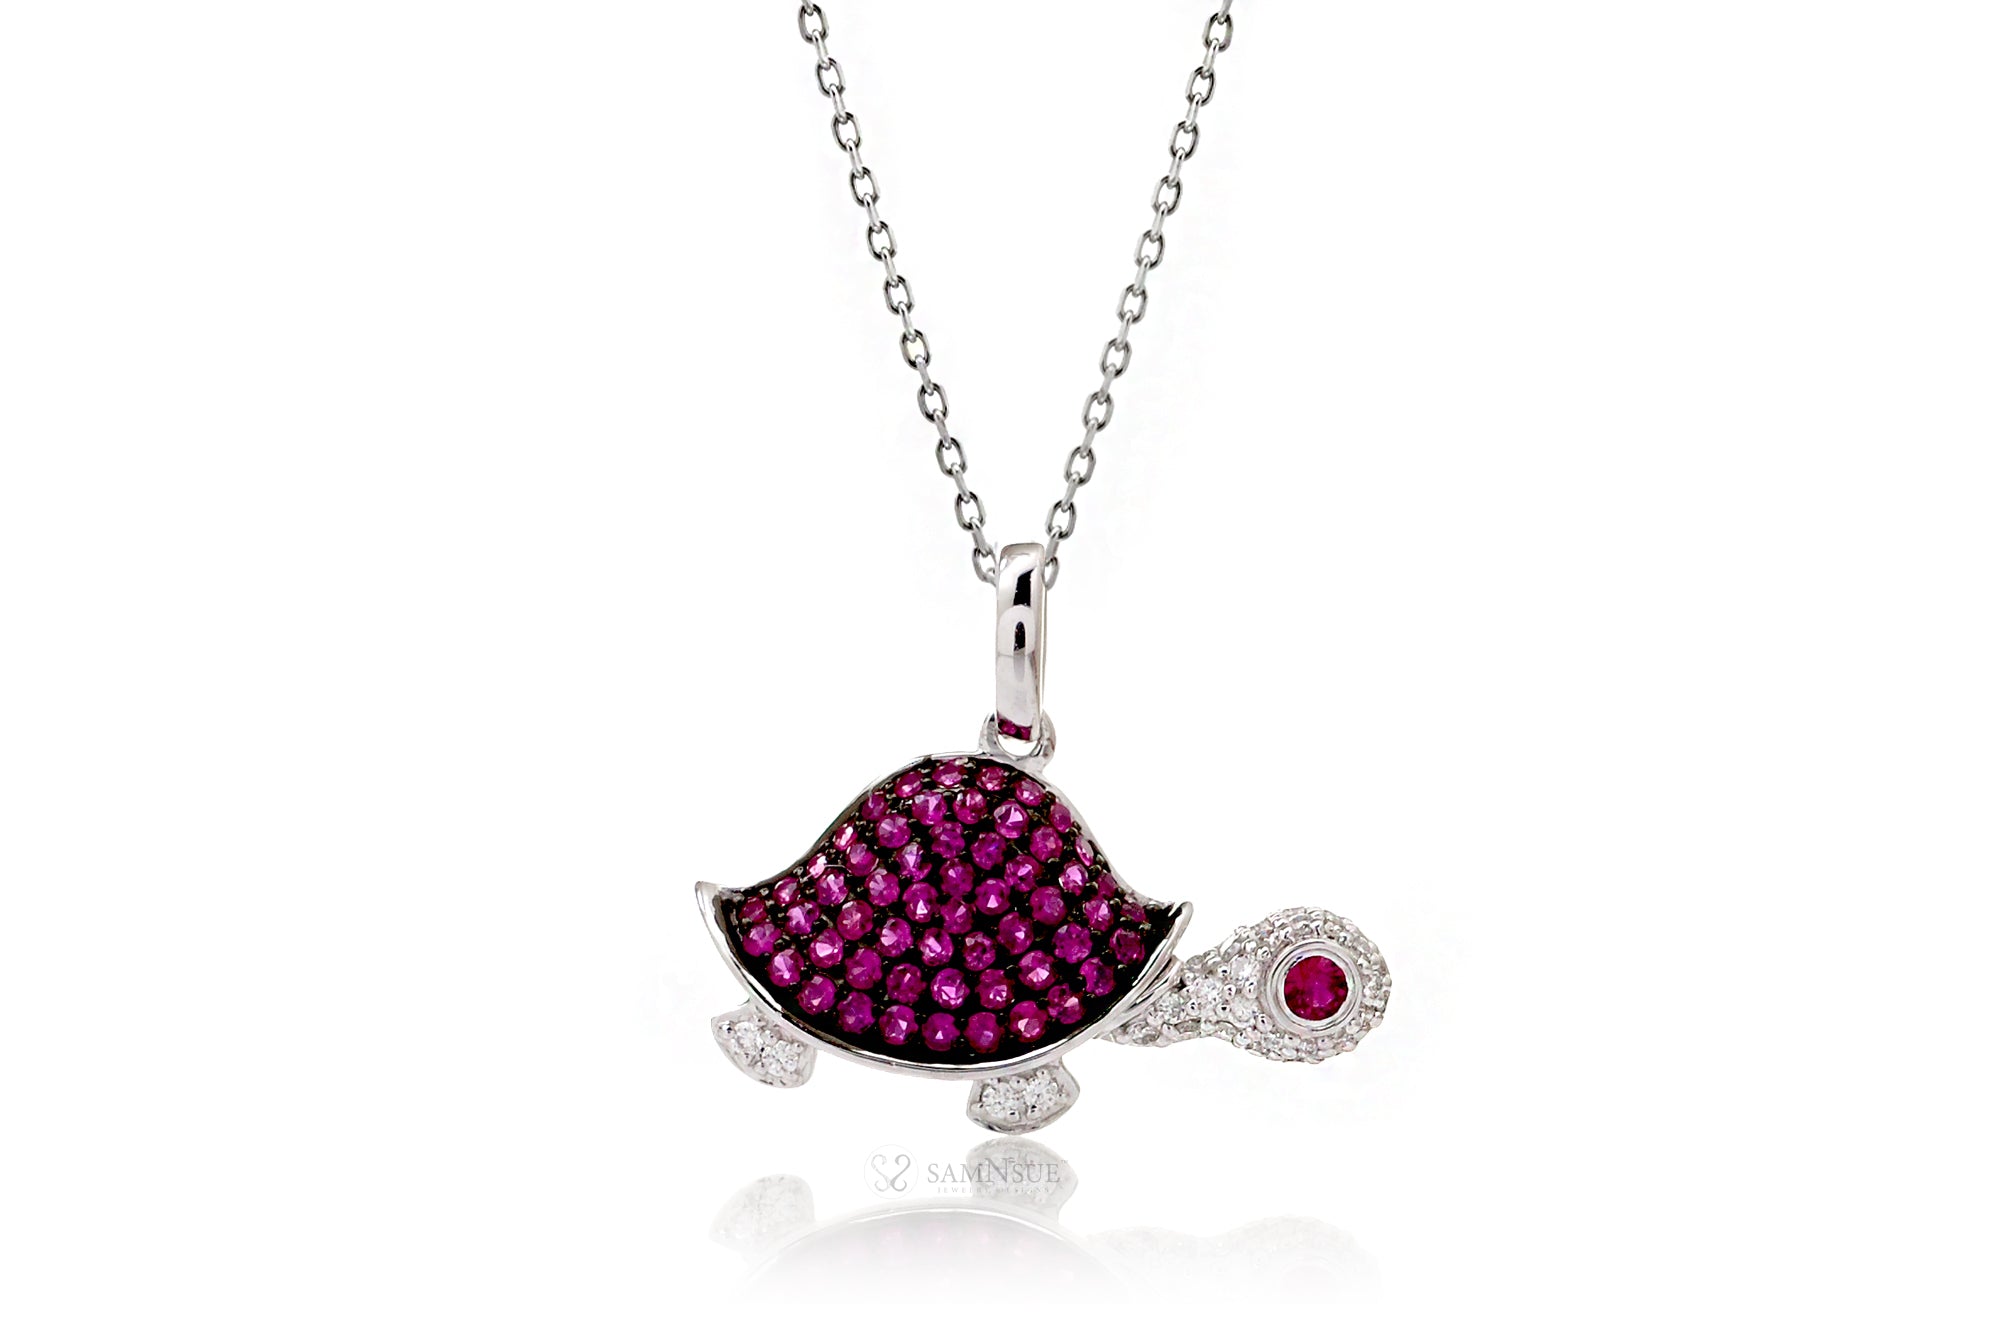 Turtle necklace with rubies in white gold